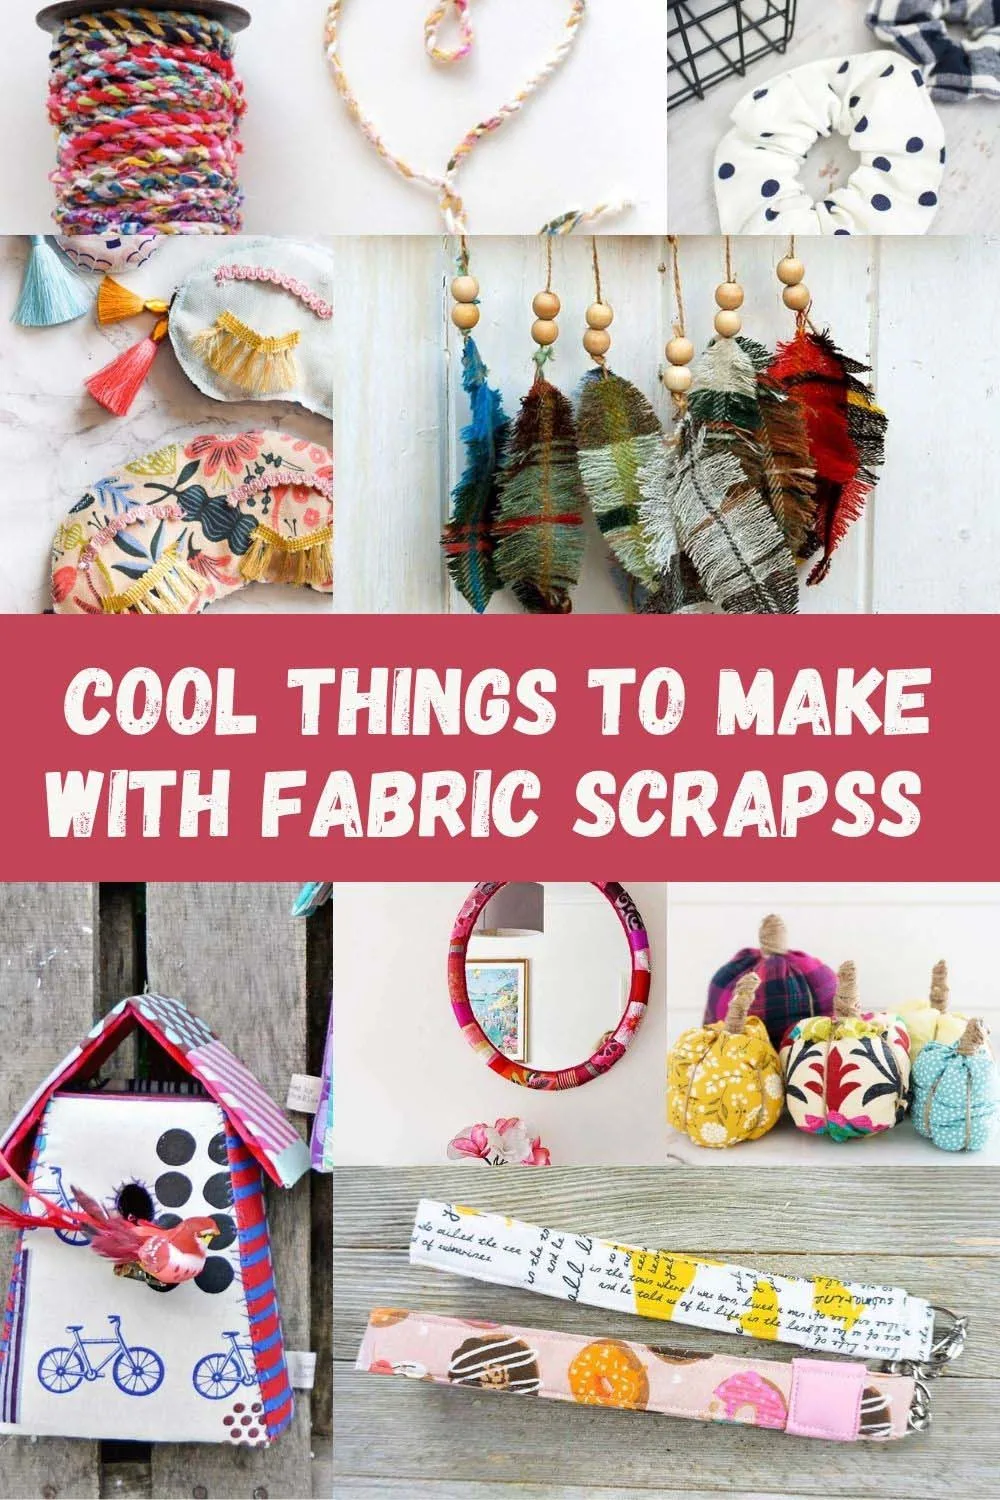 70+ Cool Things To Make With Fabric Scraps For Adults - Pillar Box Blue